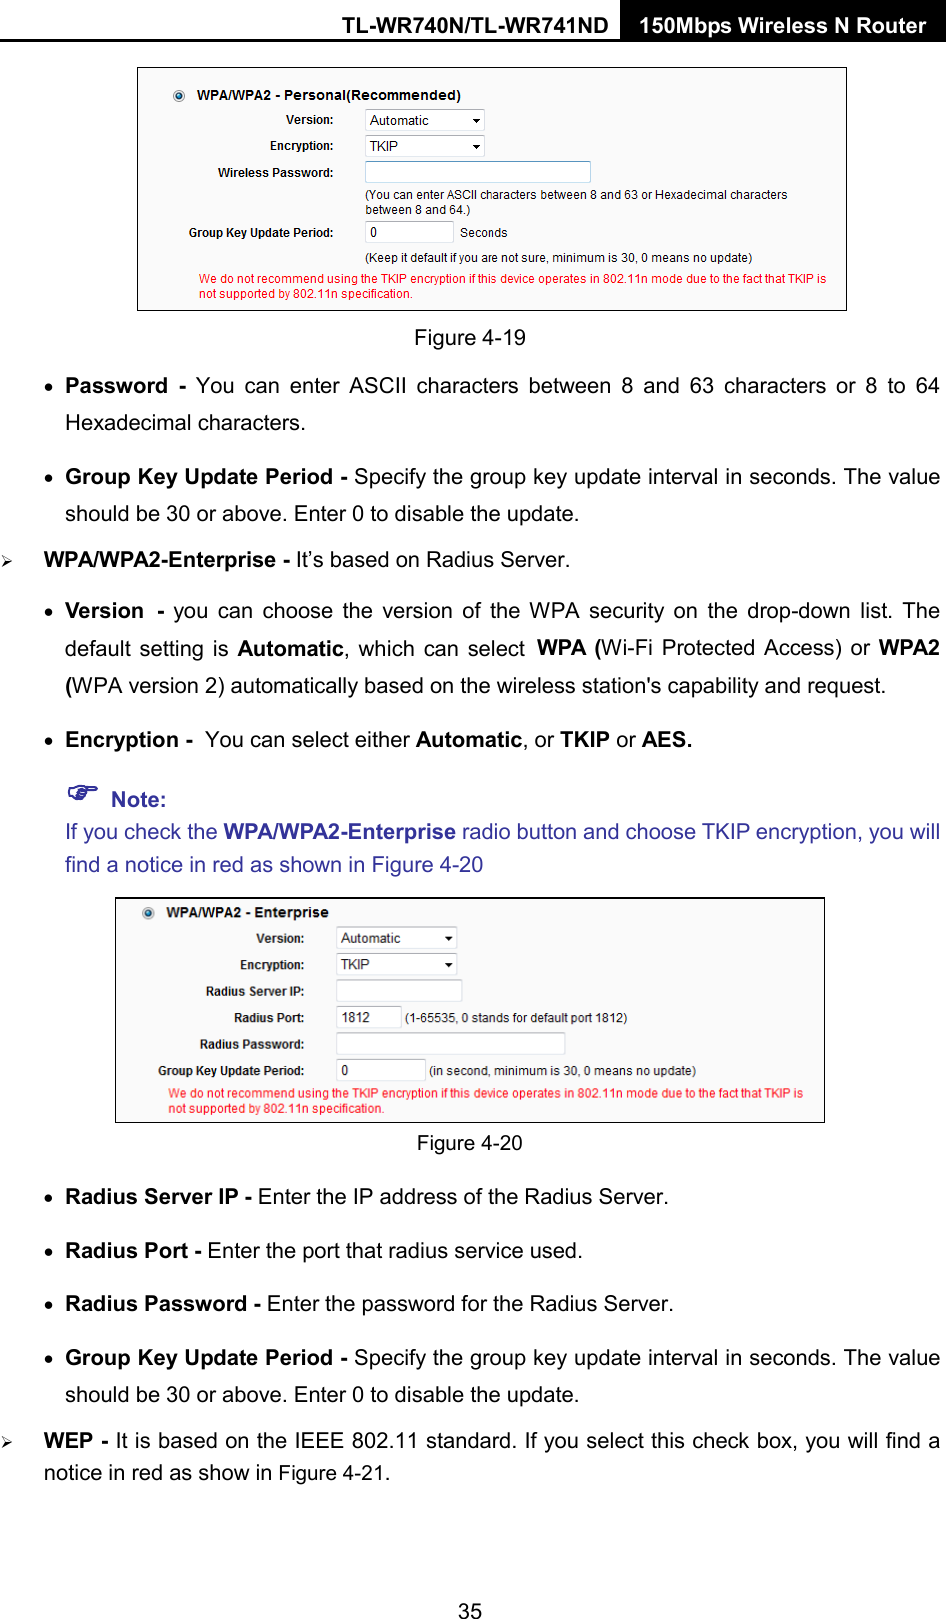 TL-WR740N/TL-WR741ND 150Mbps Wireless N Router   Figure 4-19 • Password  -  You can enter ASCII characters between 8 and 63 characters or 8 to 64 Hexadecimal characters. • Group Key Update Period - Specify the group key update interval in seconds. The value should be 30 or above. Enter 0 to disable the update.  WPA/WPA2-Enterprise - It’s based on Radius Server. • Version - you can choose the version of the WPA security on the drop-down list. The default setting is Automatic, which can select WPA  (Wi-Fi Protected Access) or  WPA2 (WPA version 2) automatically based on the wireless station&apos;s capability and request. • Encryption - You can select either Automatic, or TKIP or AES.  Note:   If you check the WPA/WPA2-Enterprise radio button and choose TKIP encryption, you will find a notice in red as shown in Figure 4-20  Figure 4-20 • Radius Server IP - Enter the IP address of the Radius Server. • Radius Port - Enter the port that radius service used. • Radius Password - Enter the password for the Radius Server. • Group Key Update Period - Specify the group key update interval in seconds. The value should be 30 or above. Enter 0 to disable the update.  WEP - It is based on the IEEE 802.11 standard. If you select this check box, you will find a notice in red as show in Figure 4-21.   35 